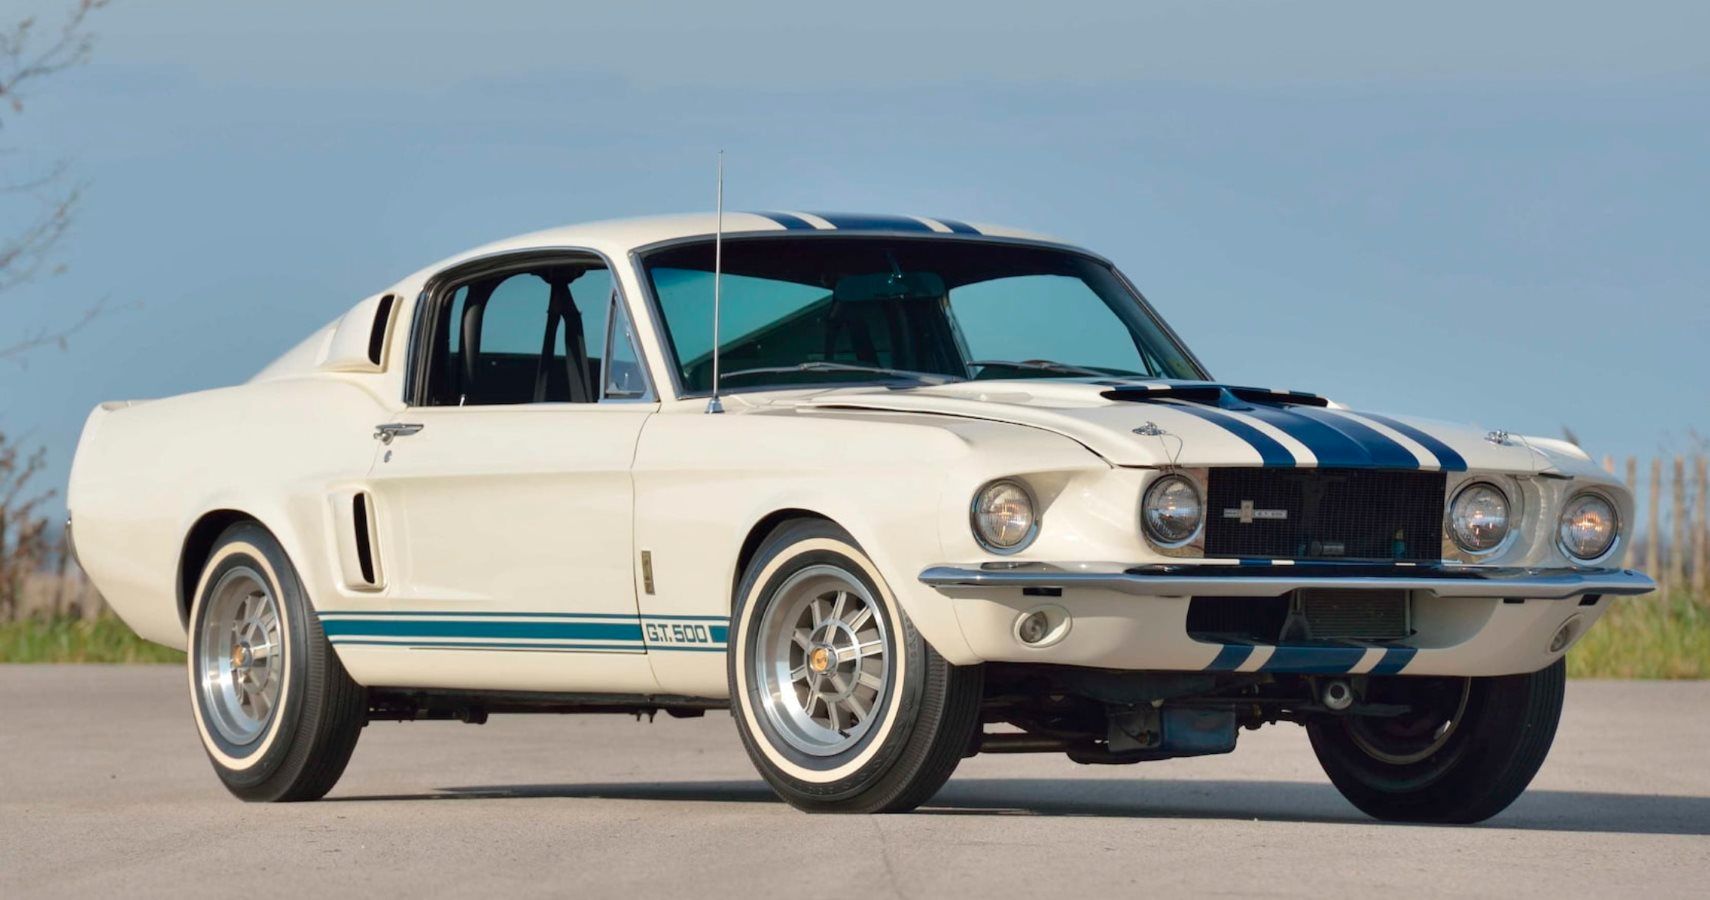 1967 Mustang Shelby GT500 Super Snake Sells For Big Money At Auction